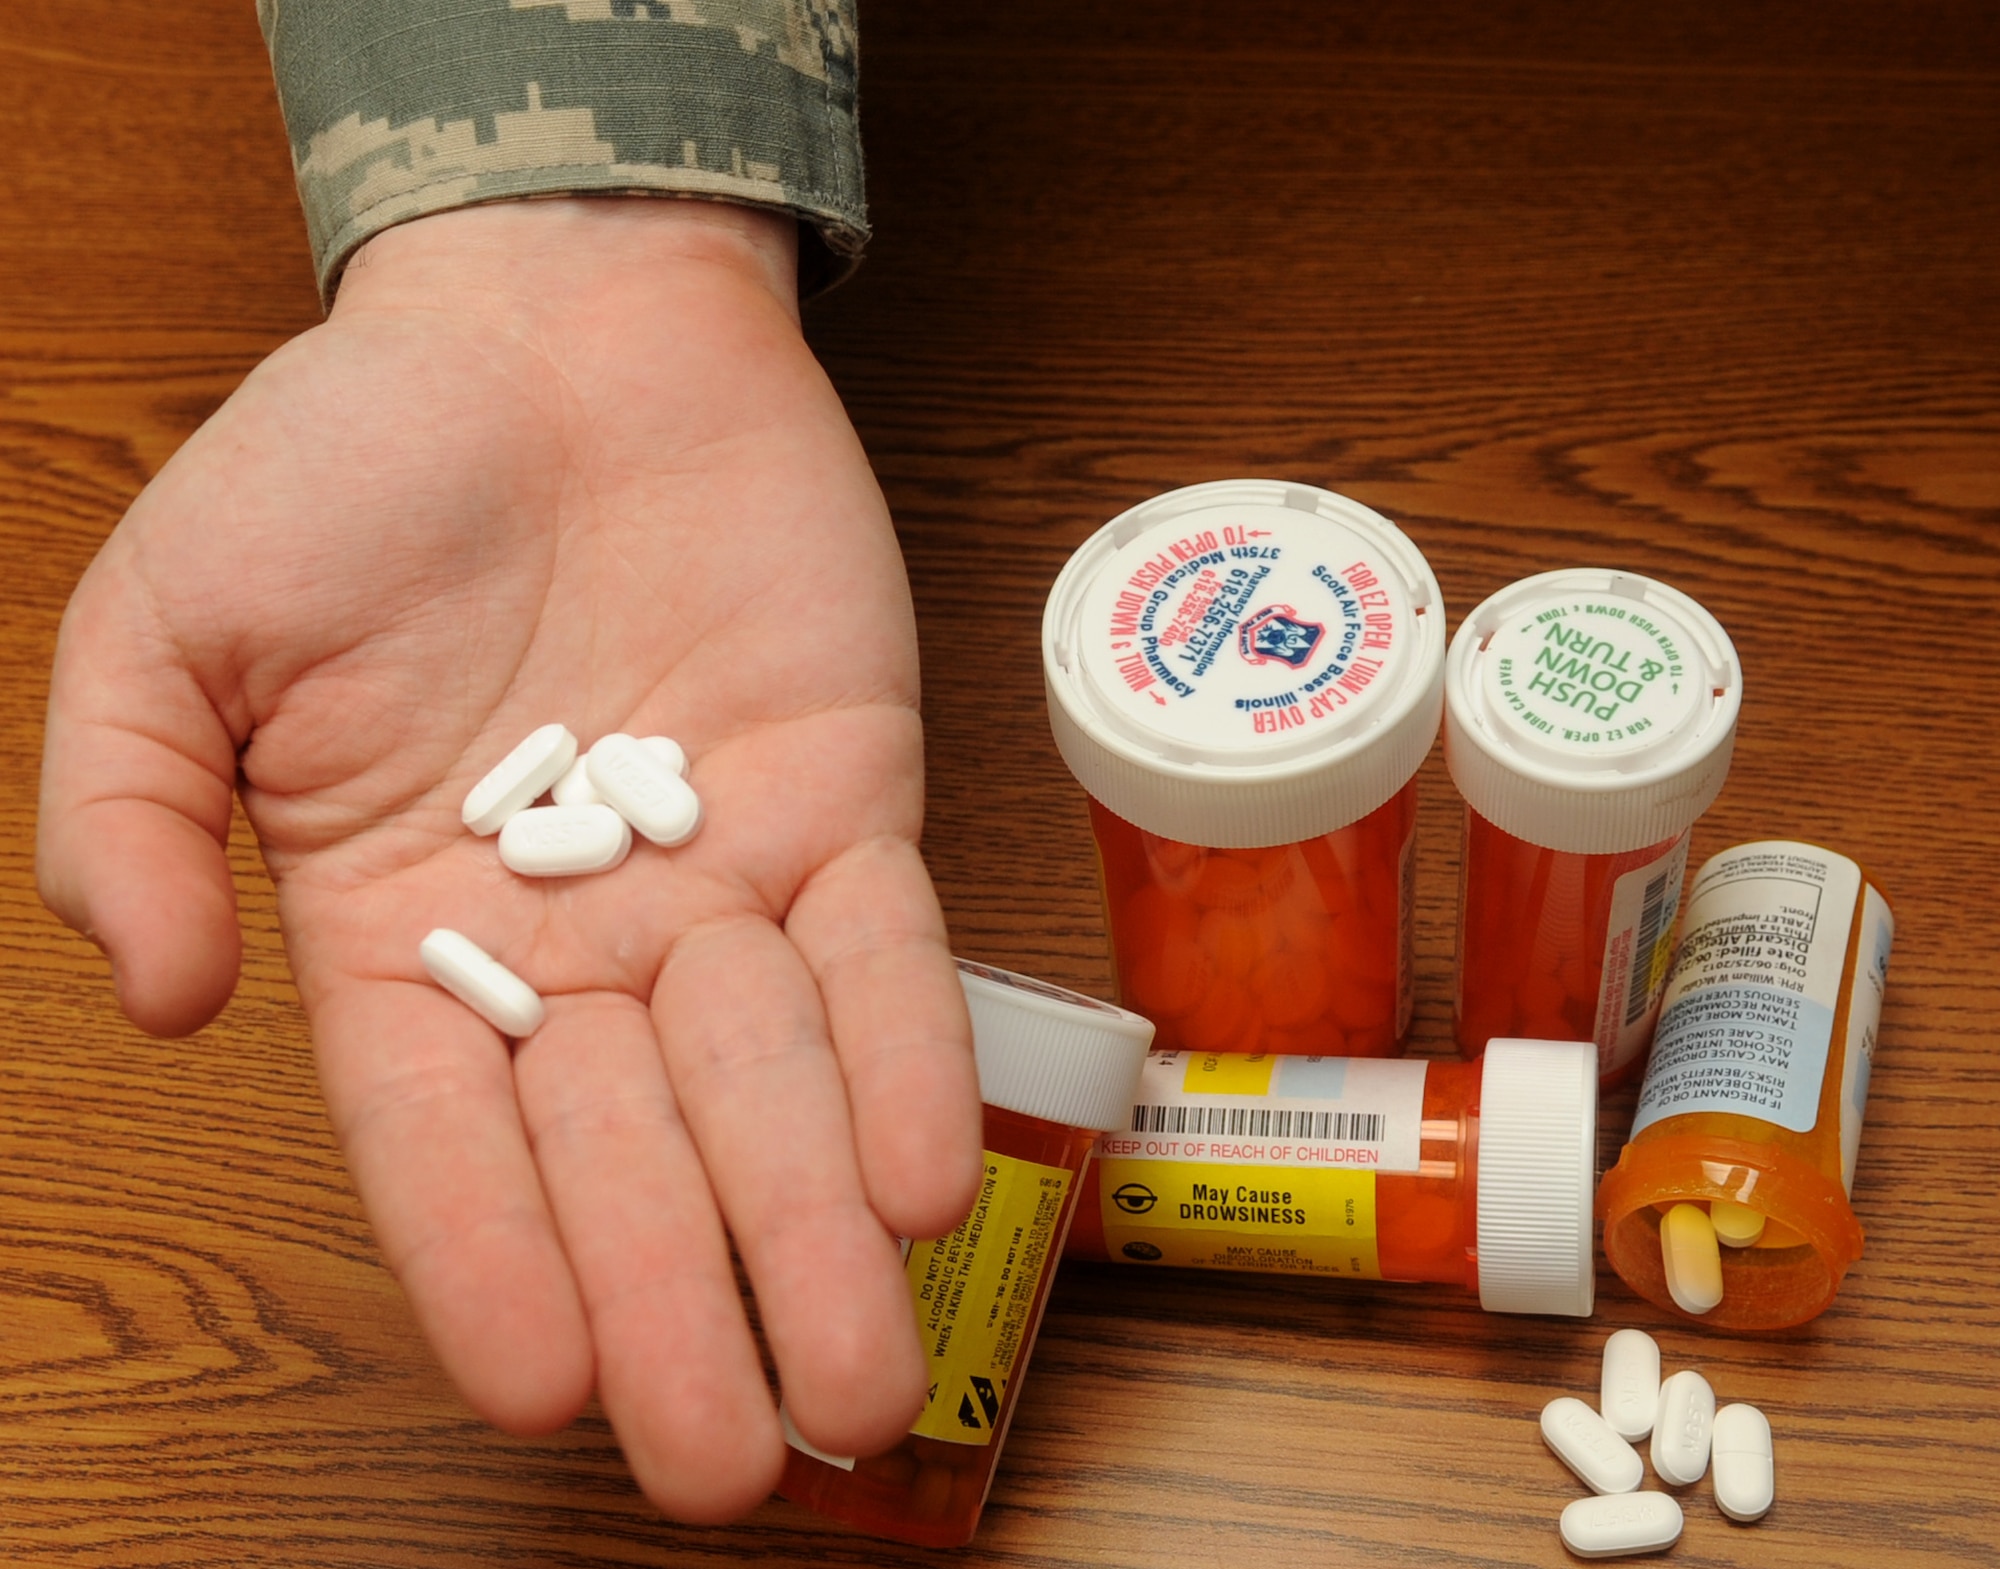 Airmen required to take opioid medication should familiarize themselves with proper usage procedures and understand the associated risks to their health and readiness. (U.S. Air Force photo illustration by Senior Airman Kristin High)